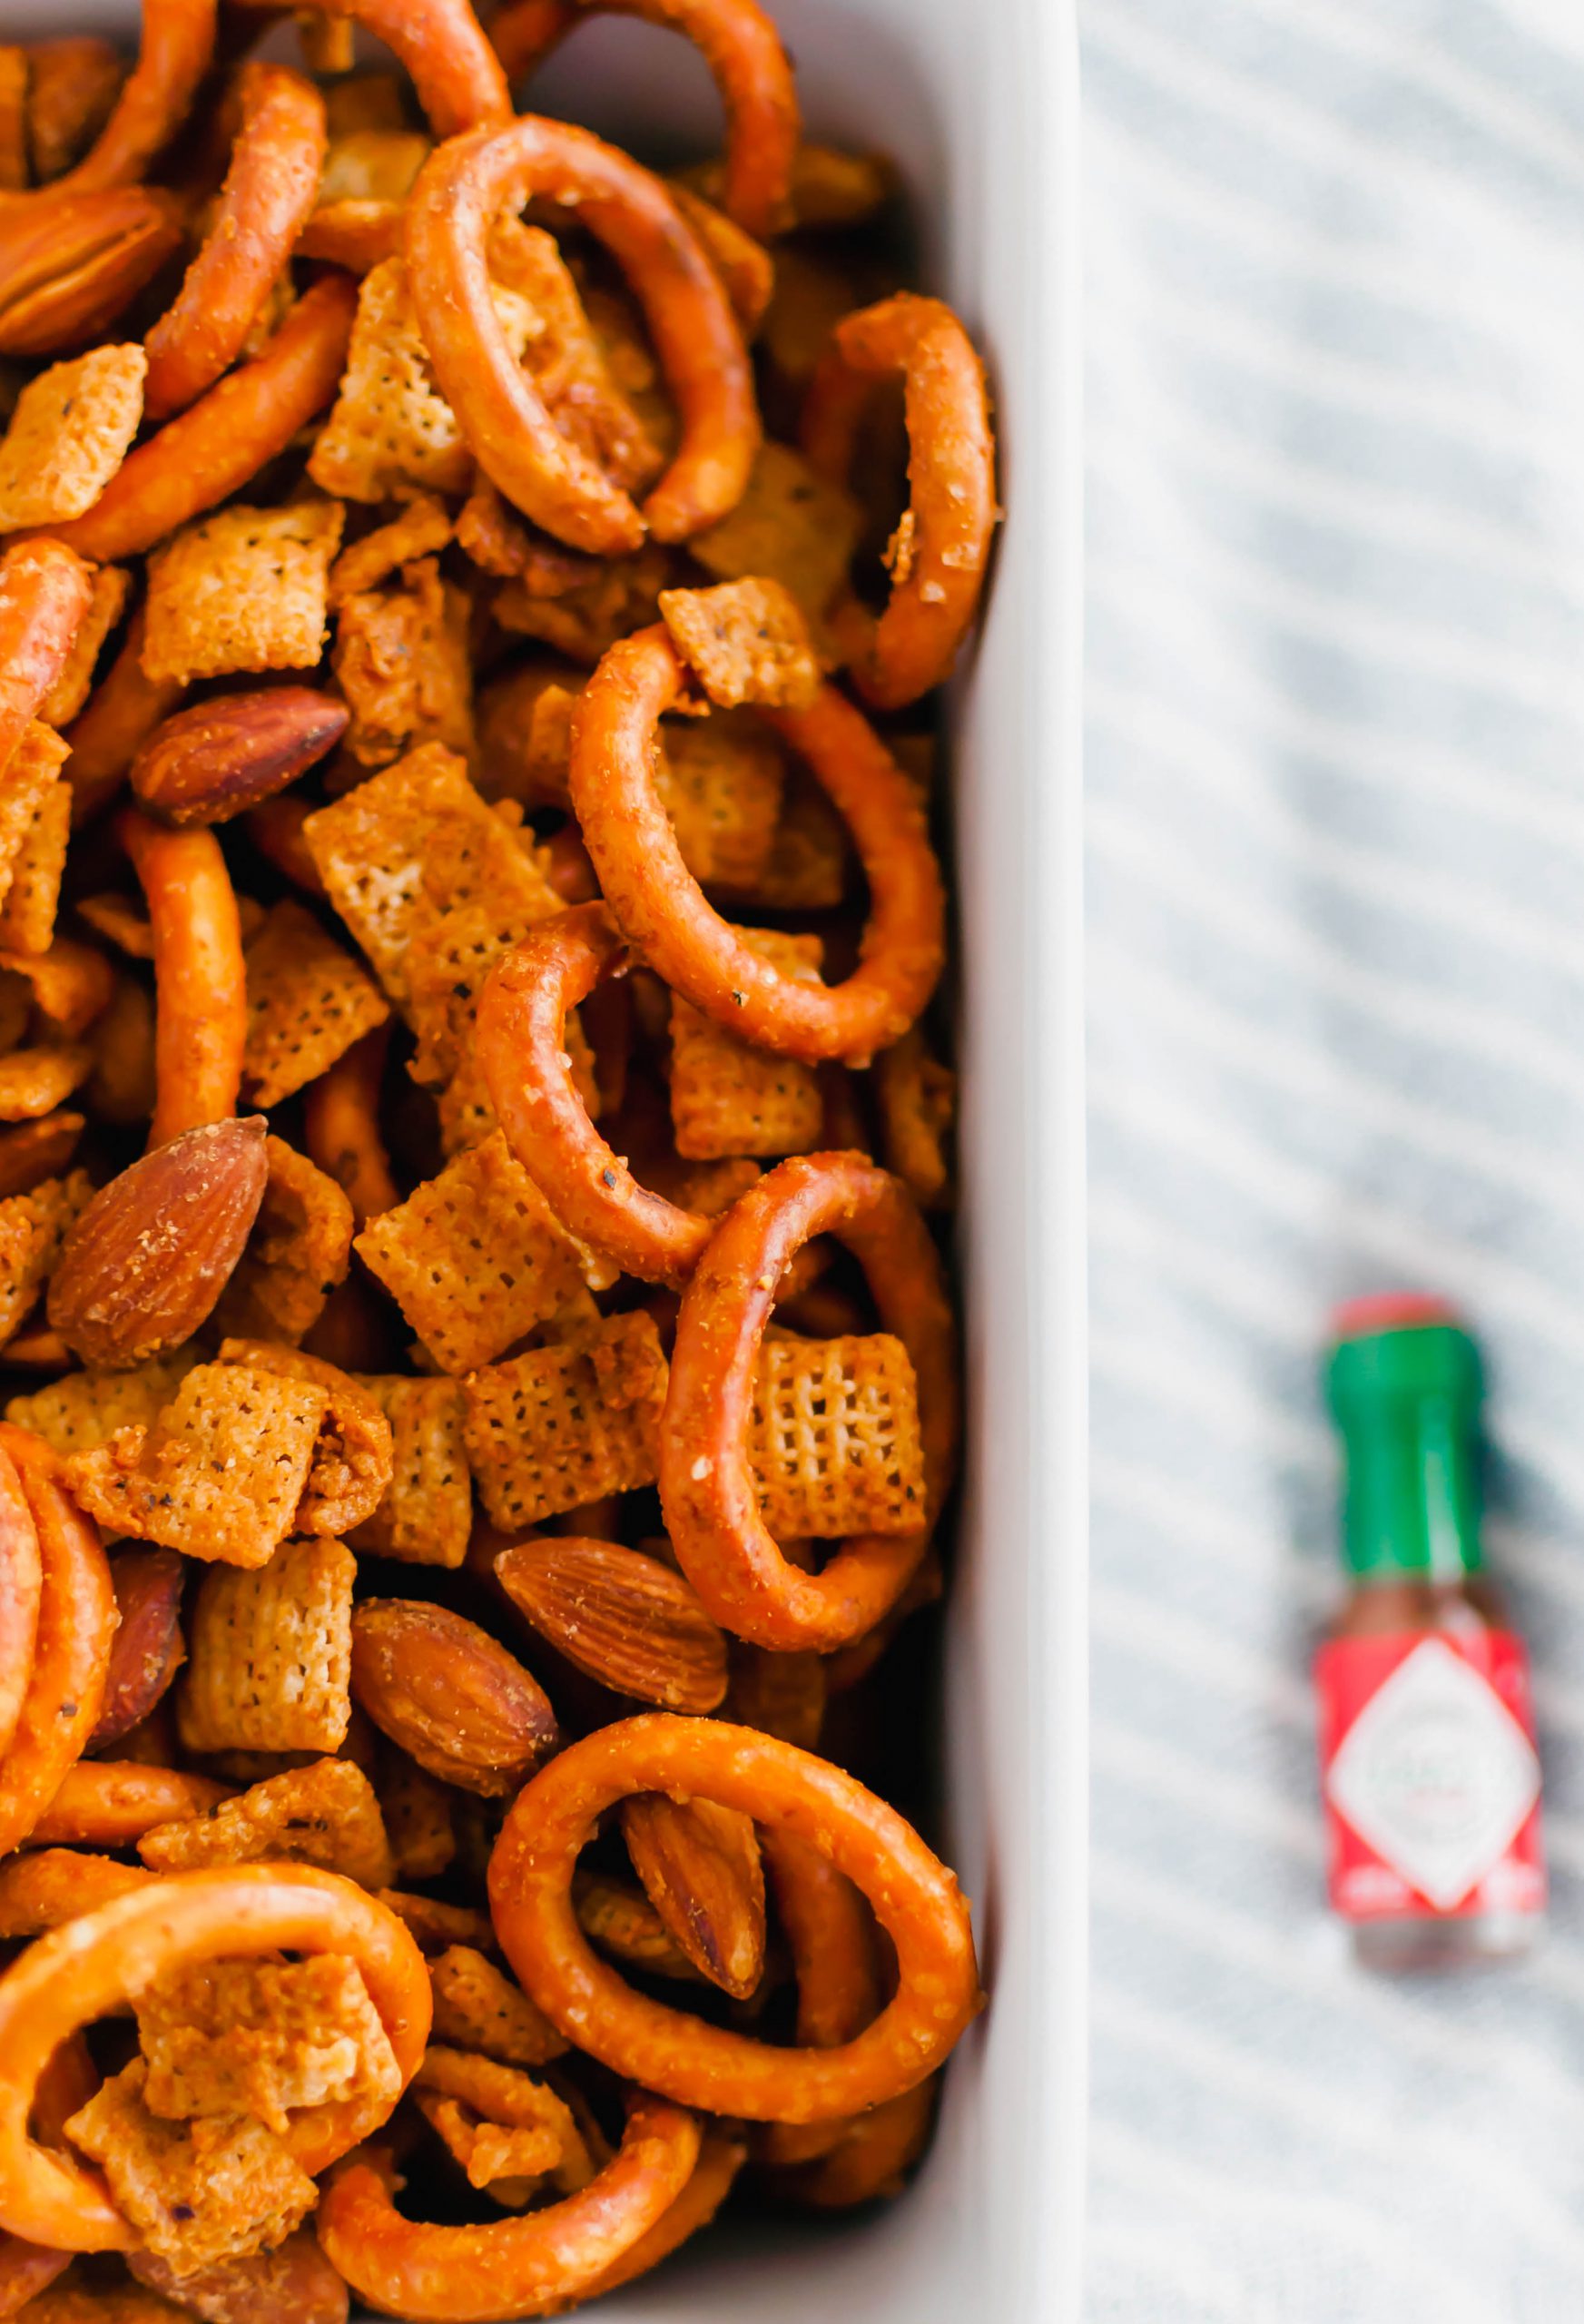 Need to add a little spice to your holidays? This Spicy Chex Mix is just what you need for snacking.